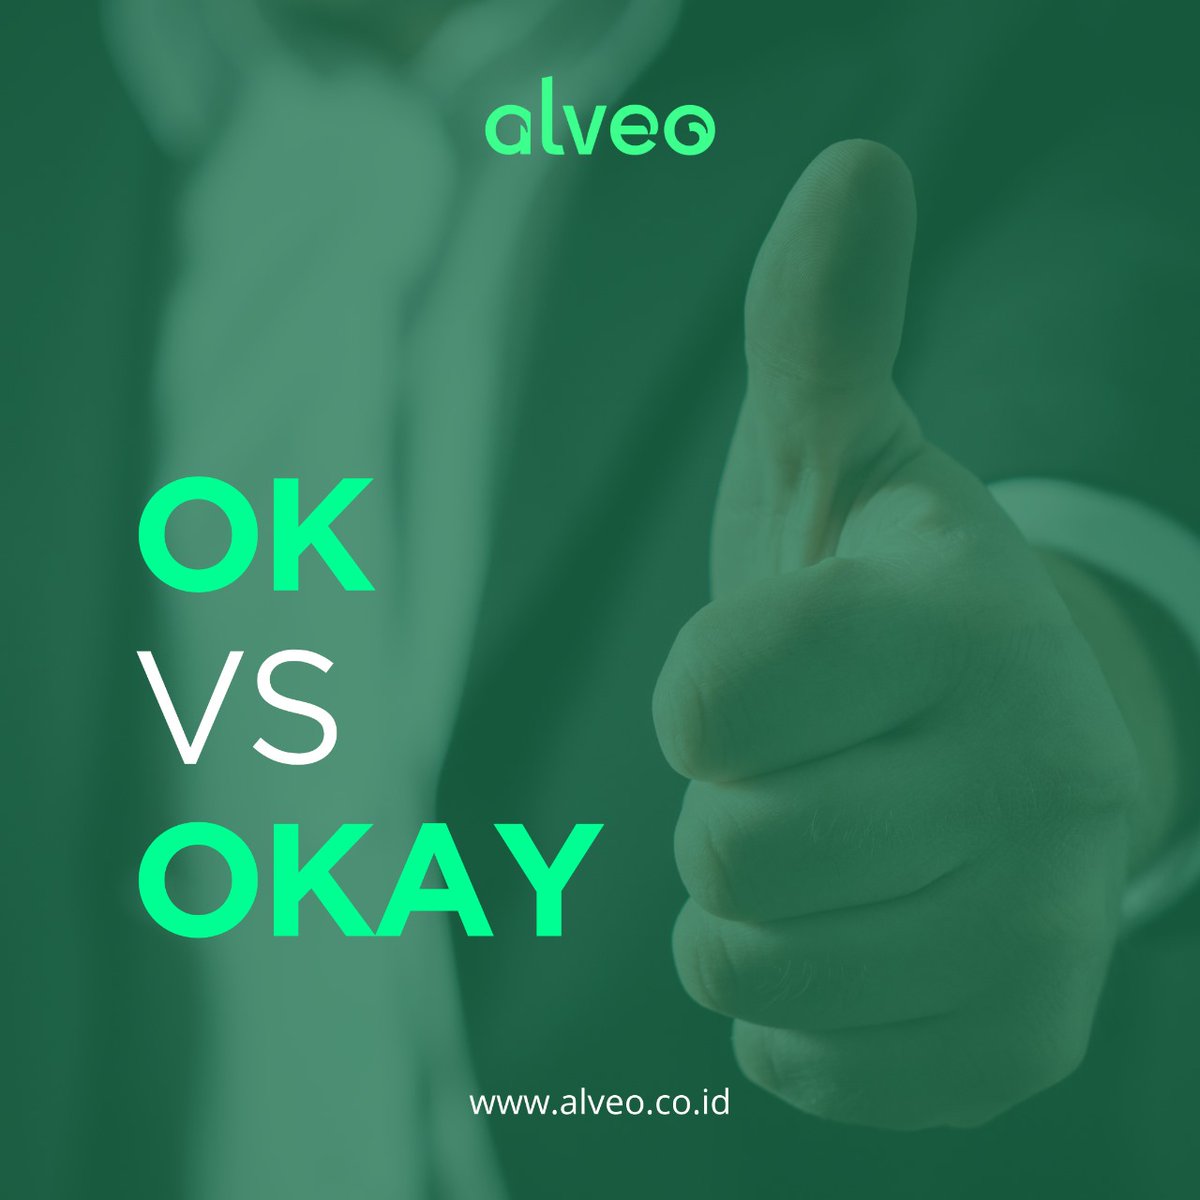 The origins of 'OK' and 'Okay' are uncertain. One theory links 'OK' to the 19th-century abbreviation 'oll korrect' (referring to 'all correct'), while another proposes that 'okay' may have African roots from the Wolof word 'waw kay.' #OK #ollkorrect #okay